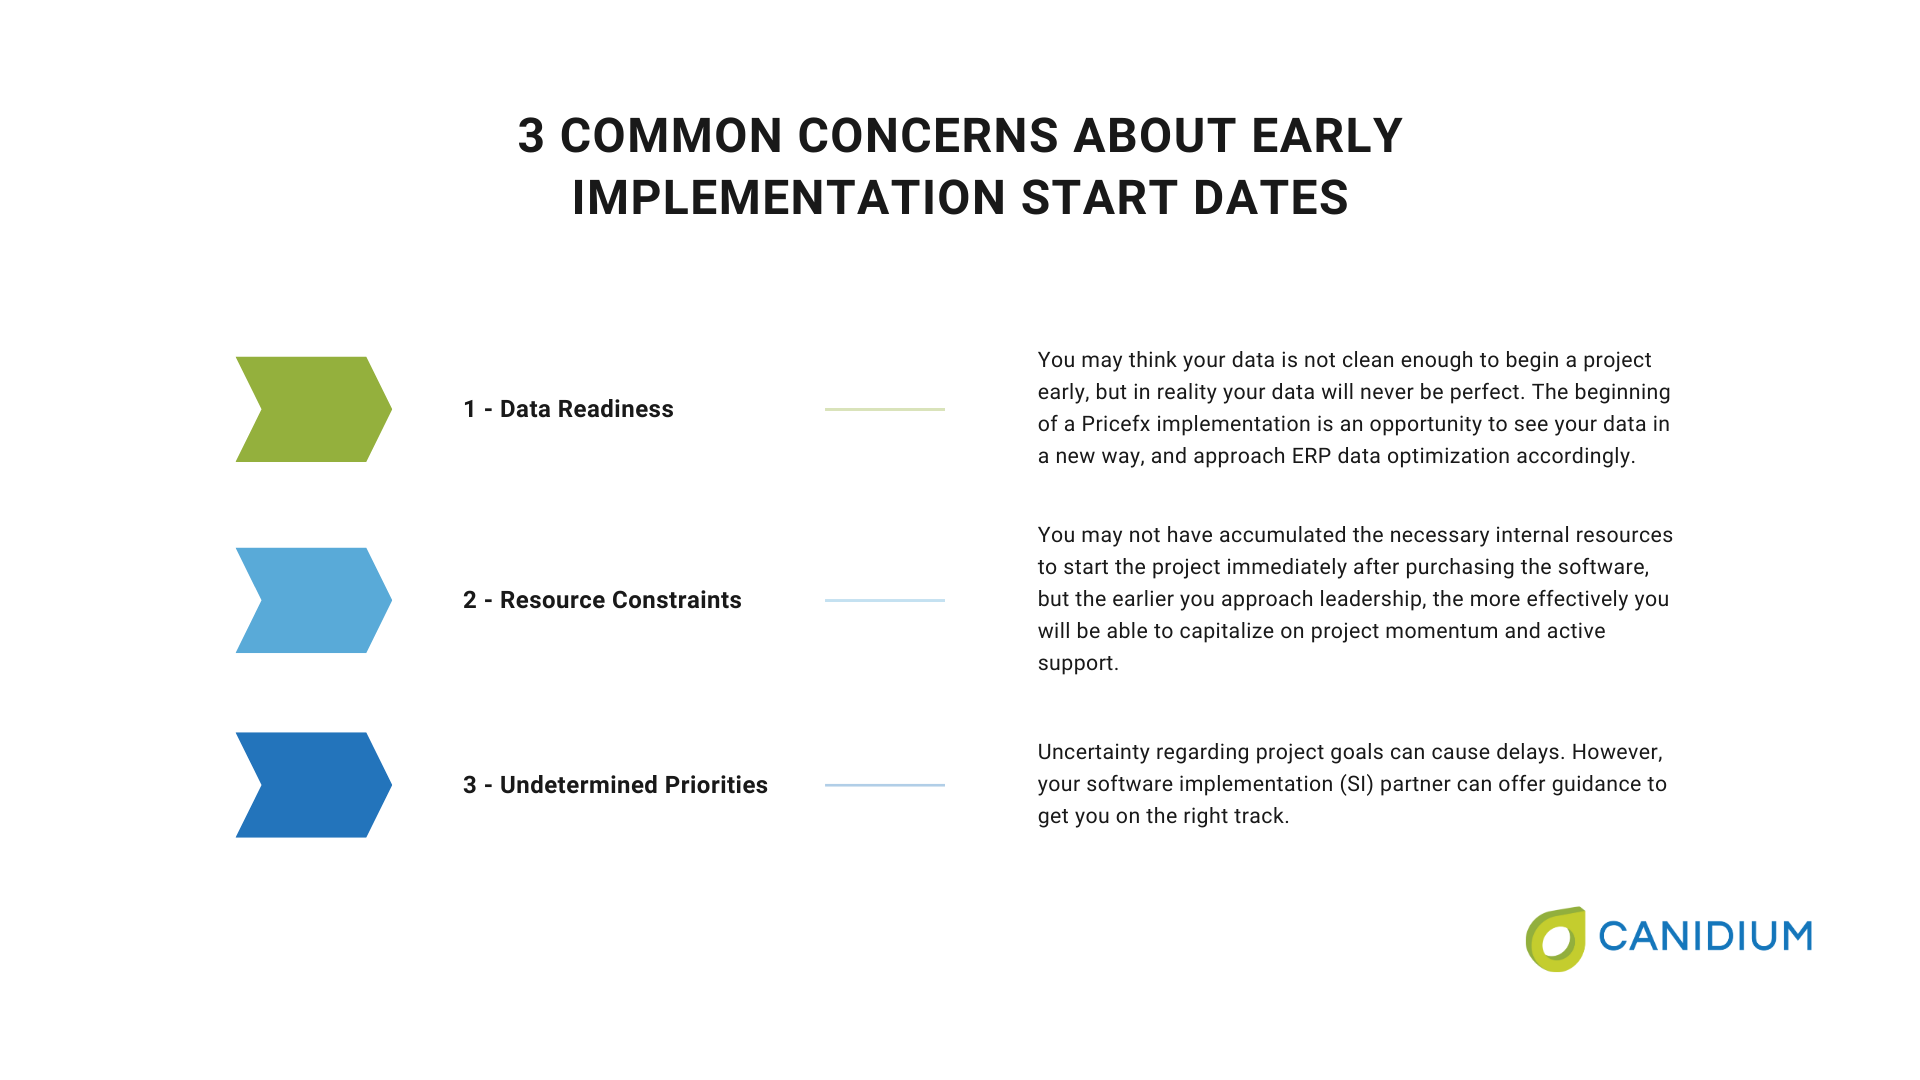 3 Common concerns about early implementation project start dates